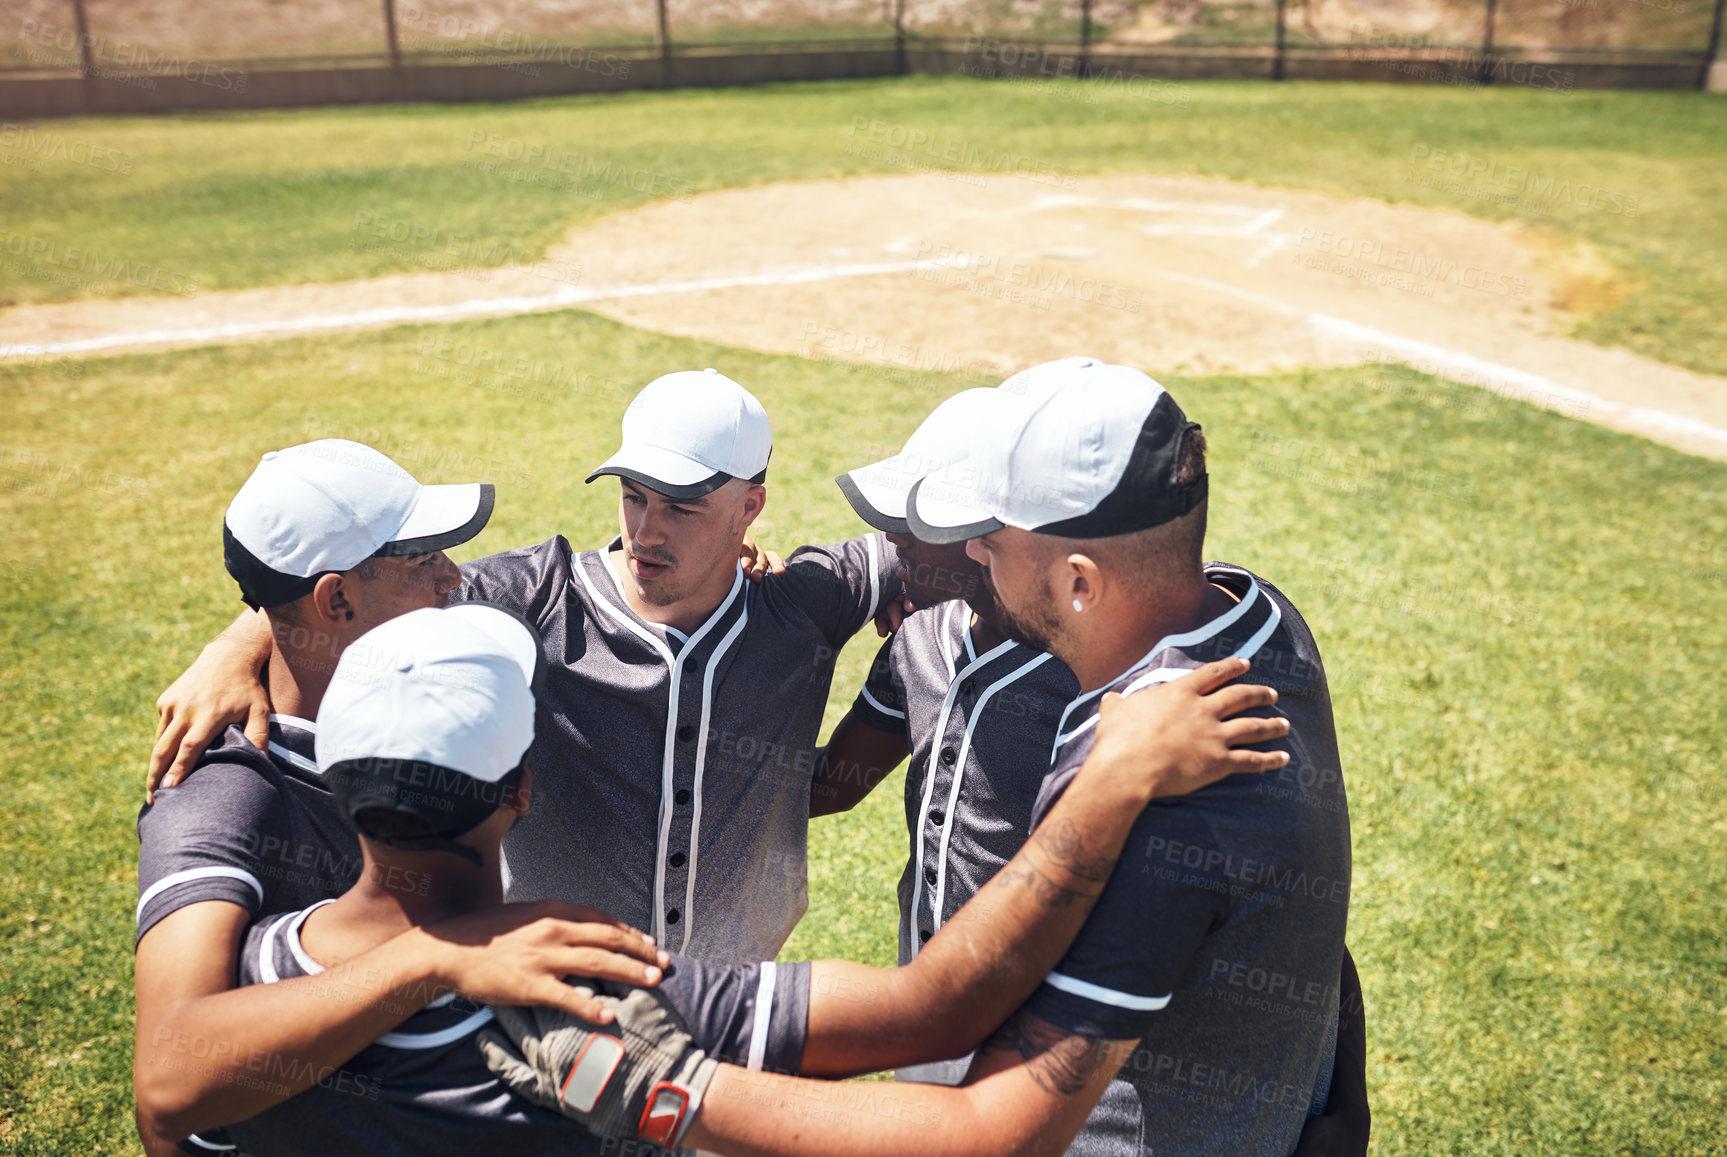 Buy stock photo Shot of a group of young men huddled together at a baseball game